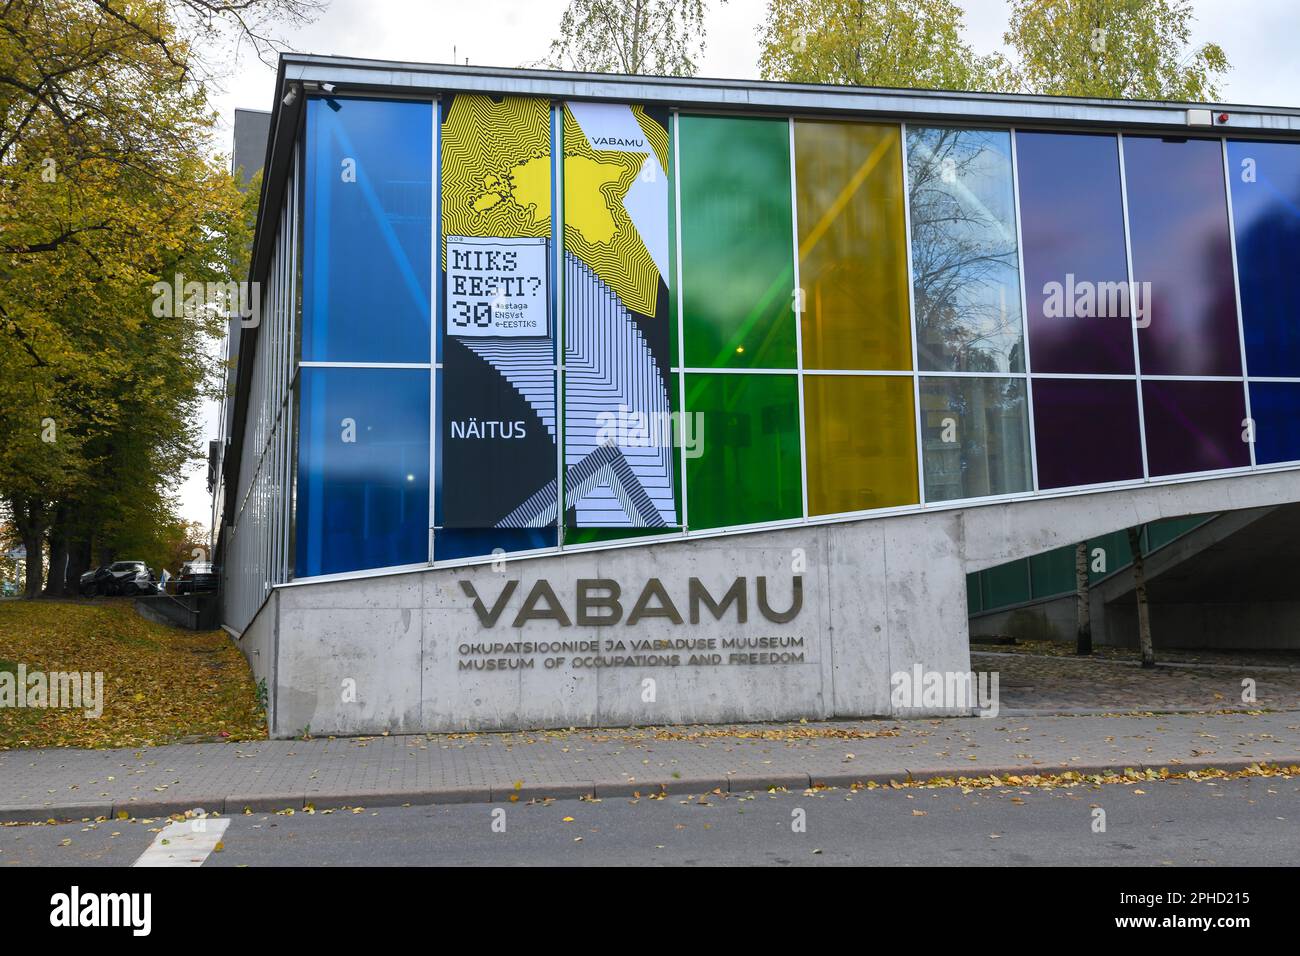 Vabamu Museum of Occupations and Freedom in Tallinn. Exterior of Museum of Estonian history telling about the occupations of Estonia named Vabamu. Stock Photo